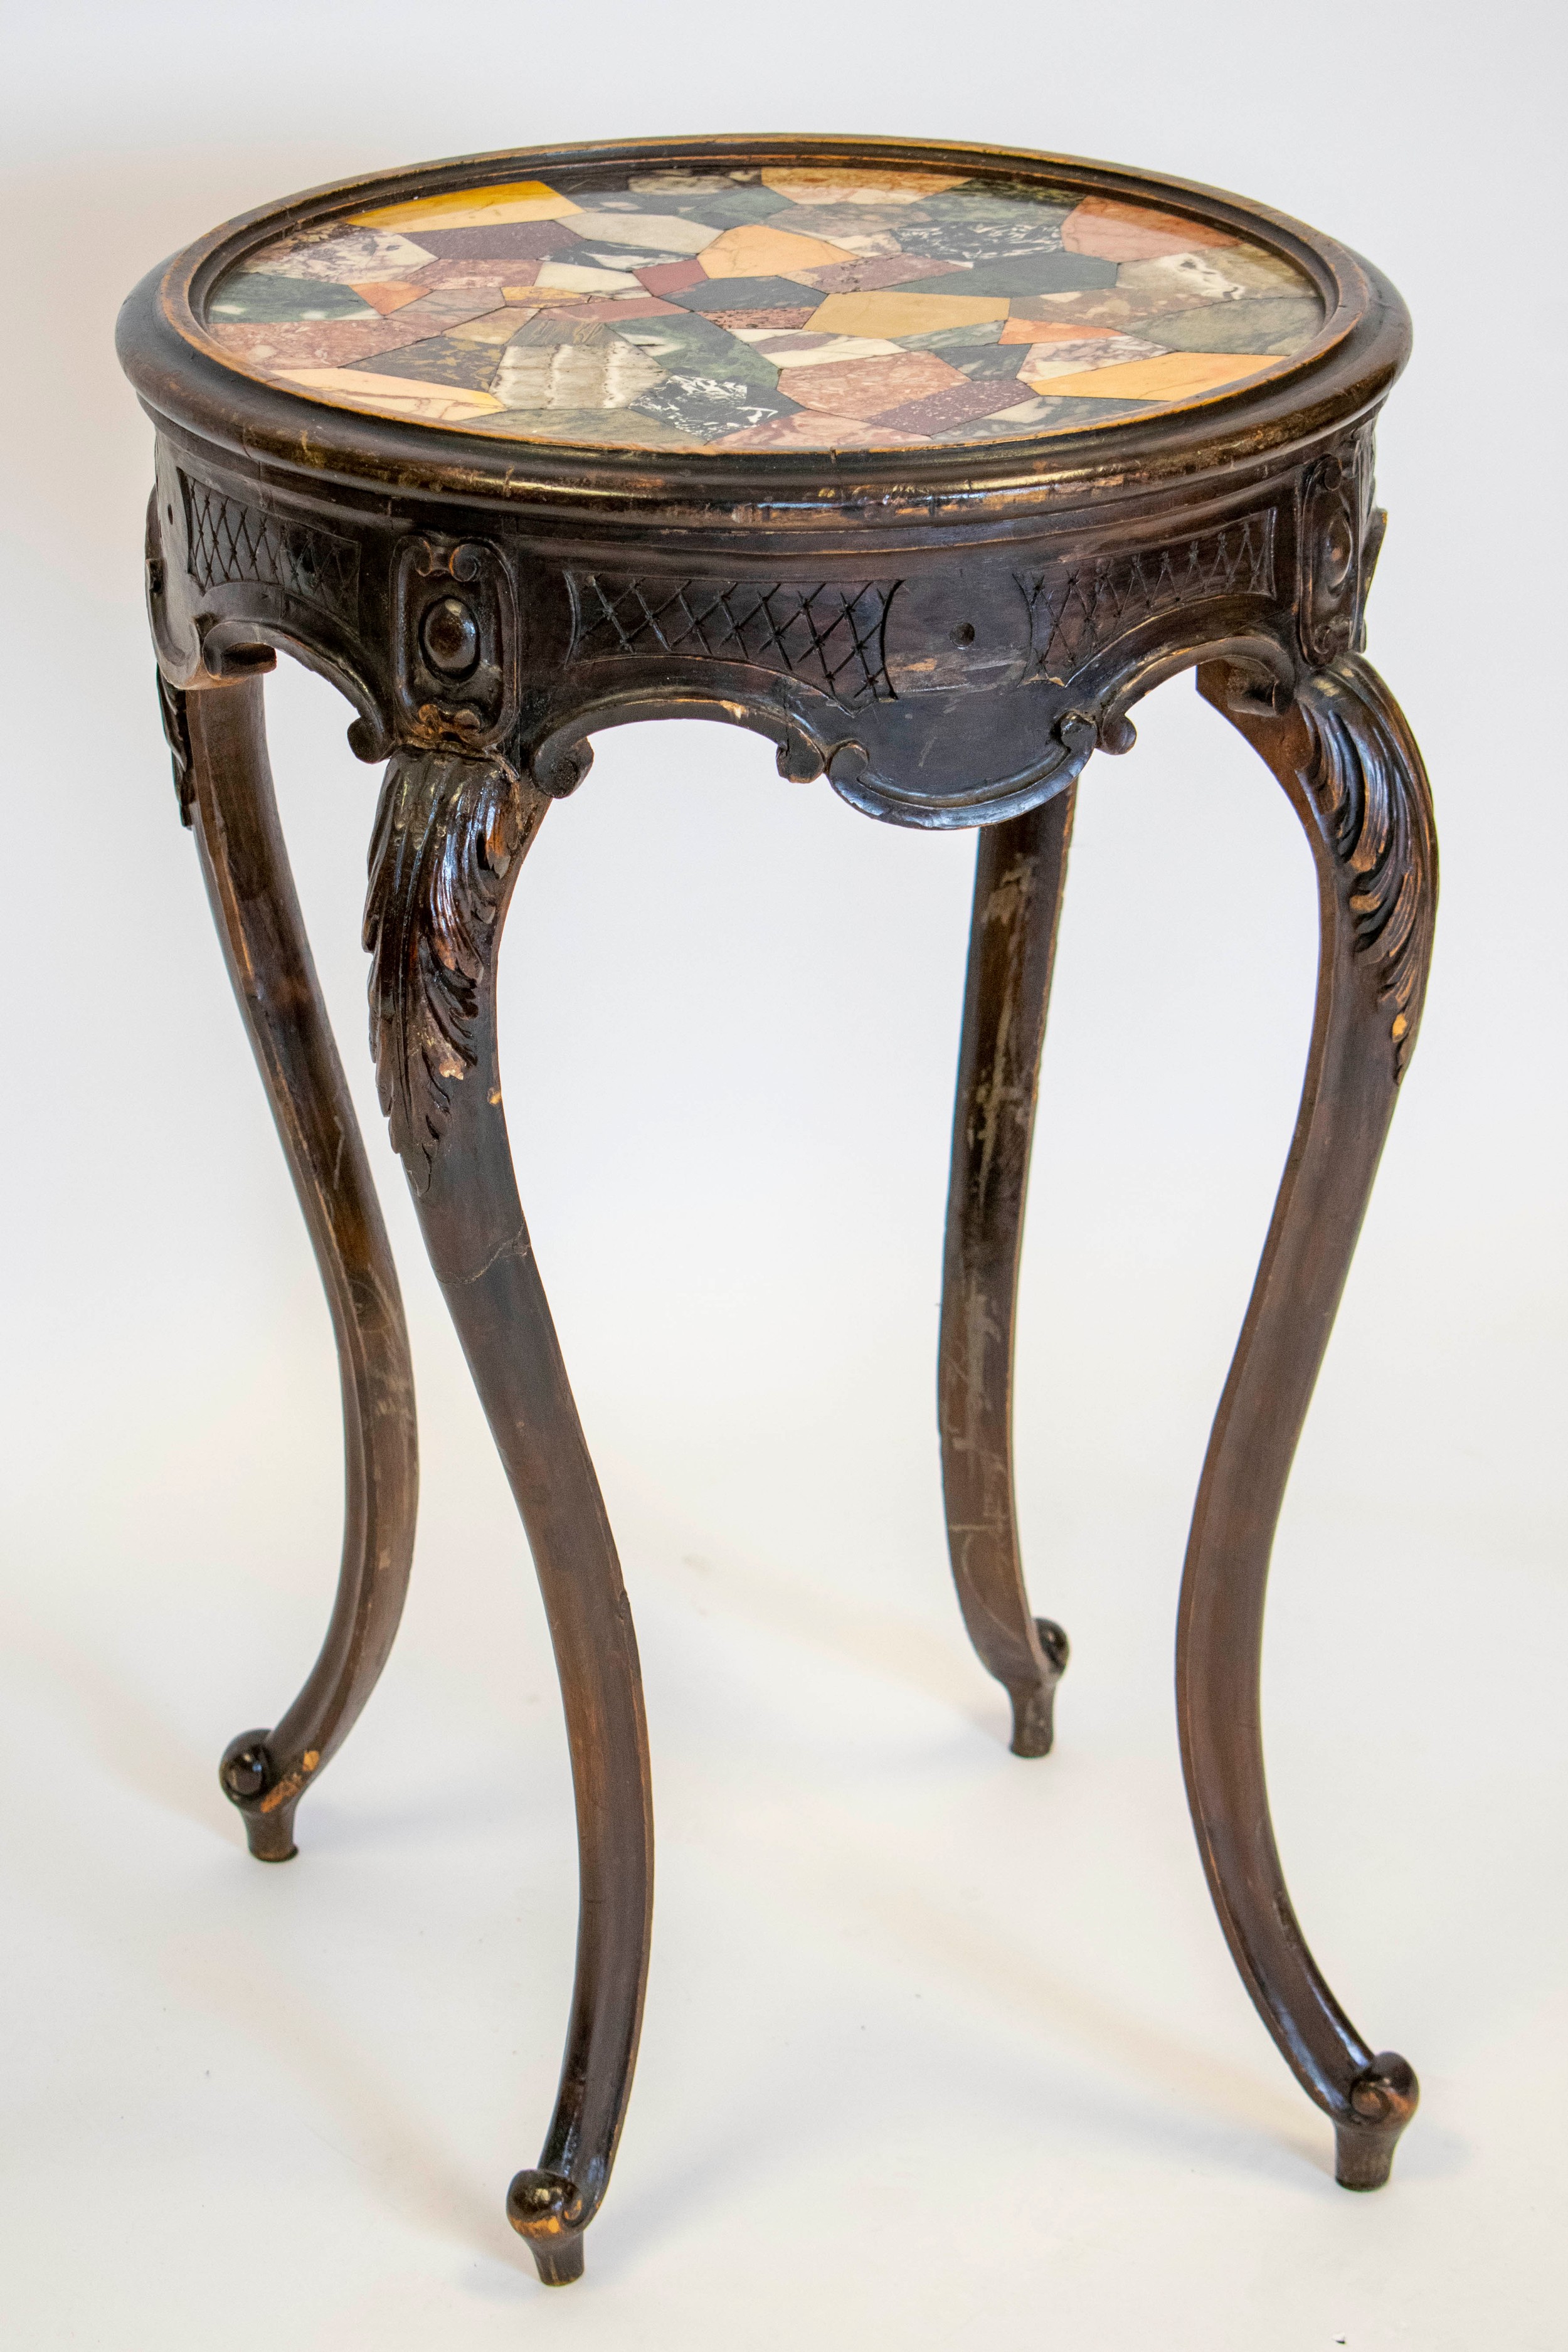 SPECIMEN MARBLE TABLE, 77cm H x 50cm D, 19th century French with circular top.